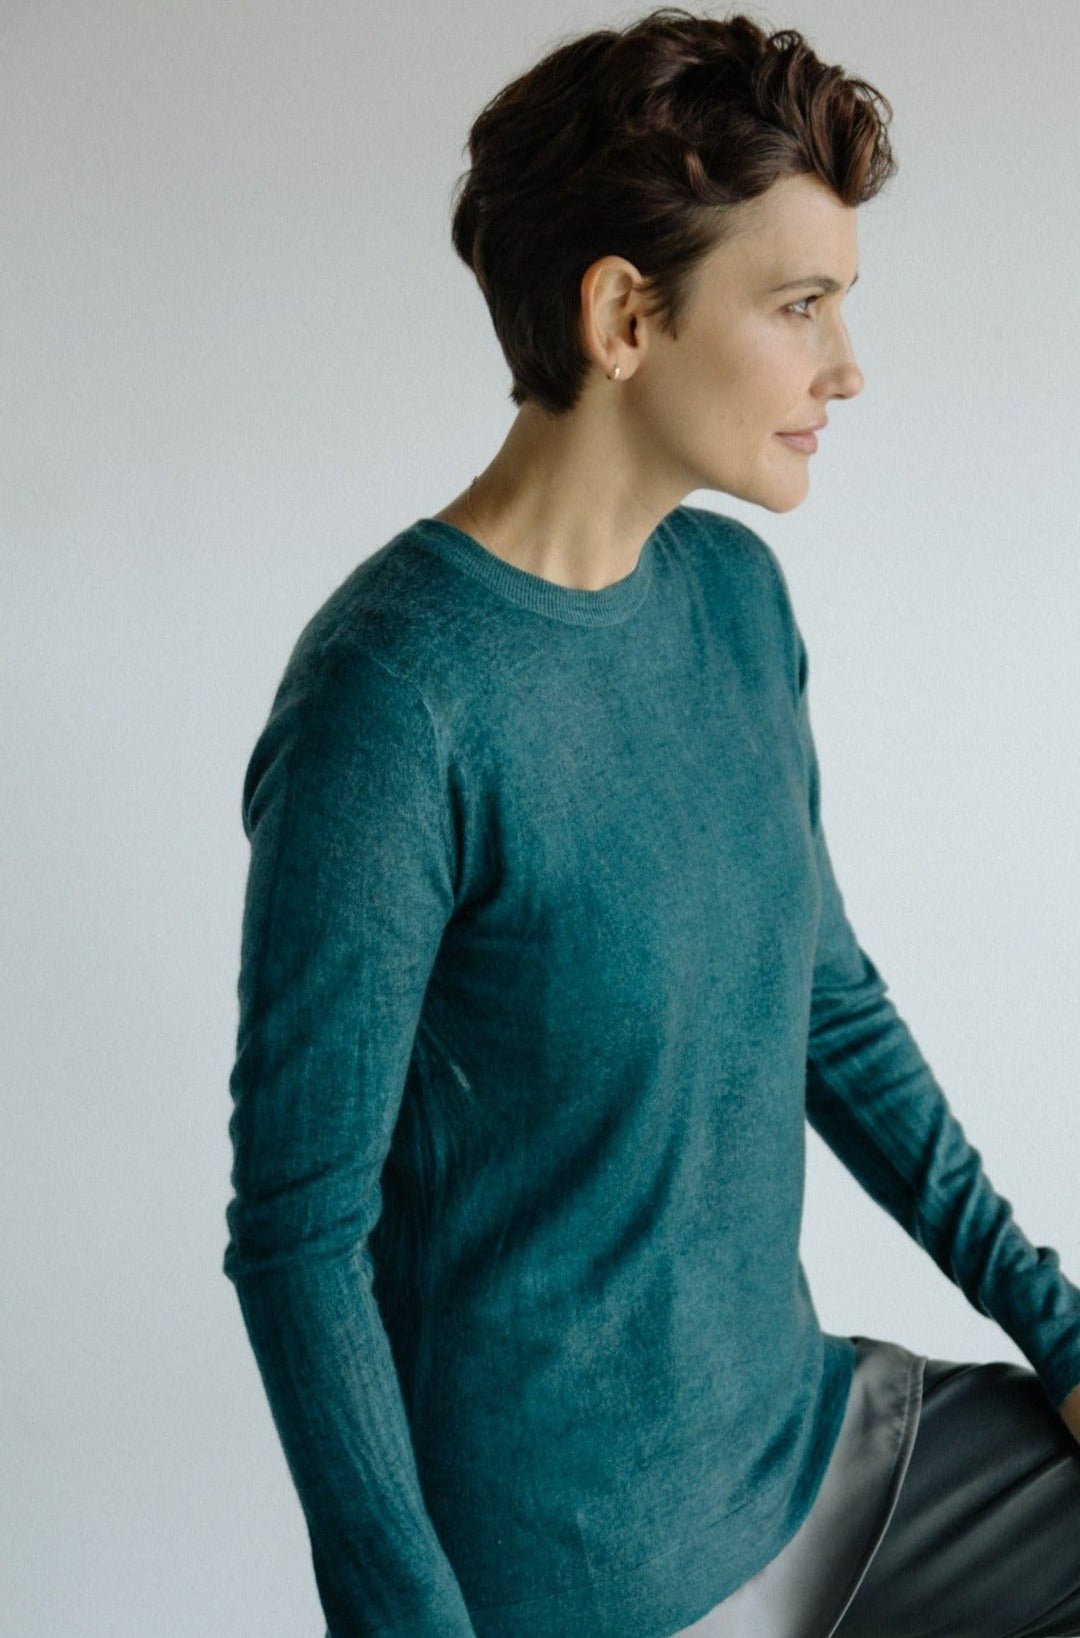 SHANA LIGHTWEIGHT CREWNECK SWEATER IN HAND-DYED CASHMERE - Jarbo